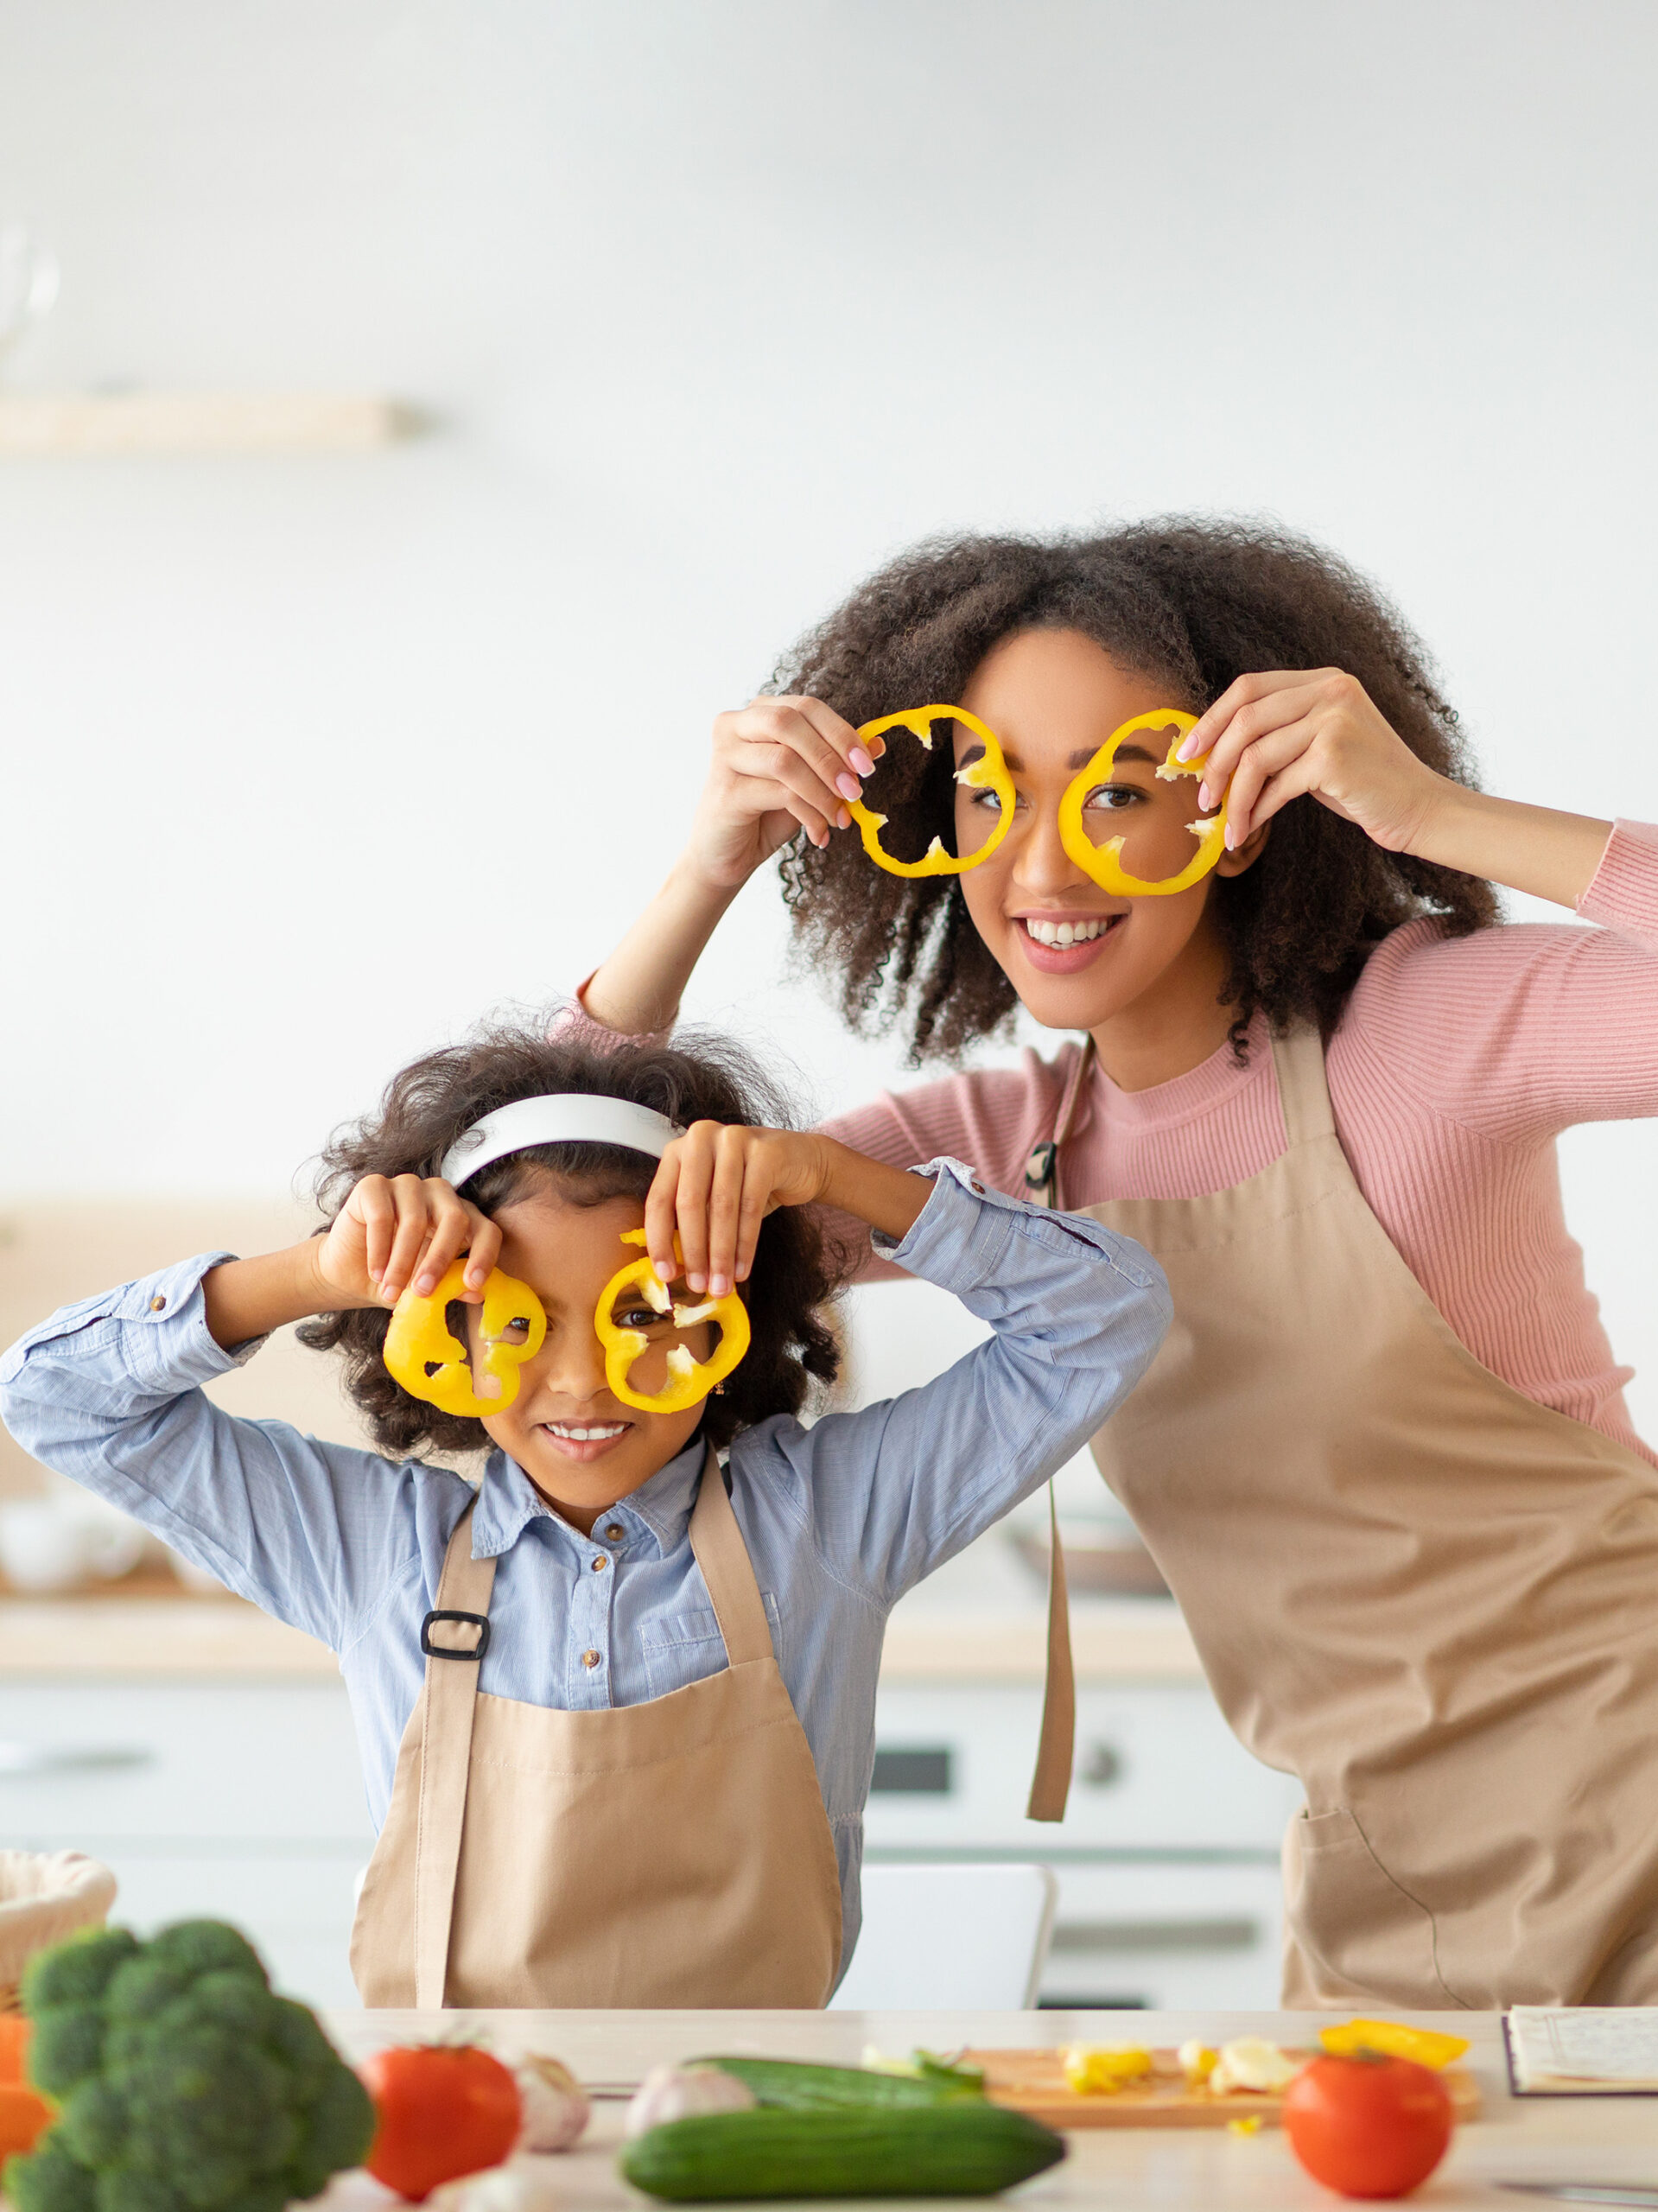 How to make eating healthy fun for kids and teens